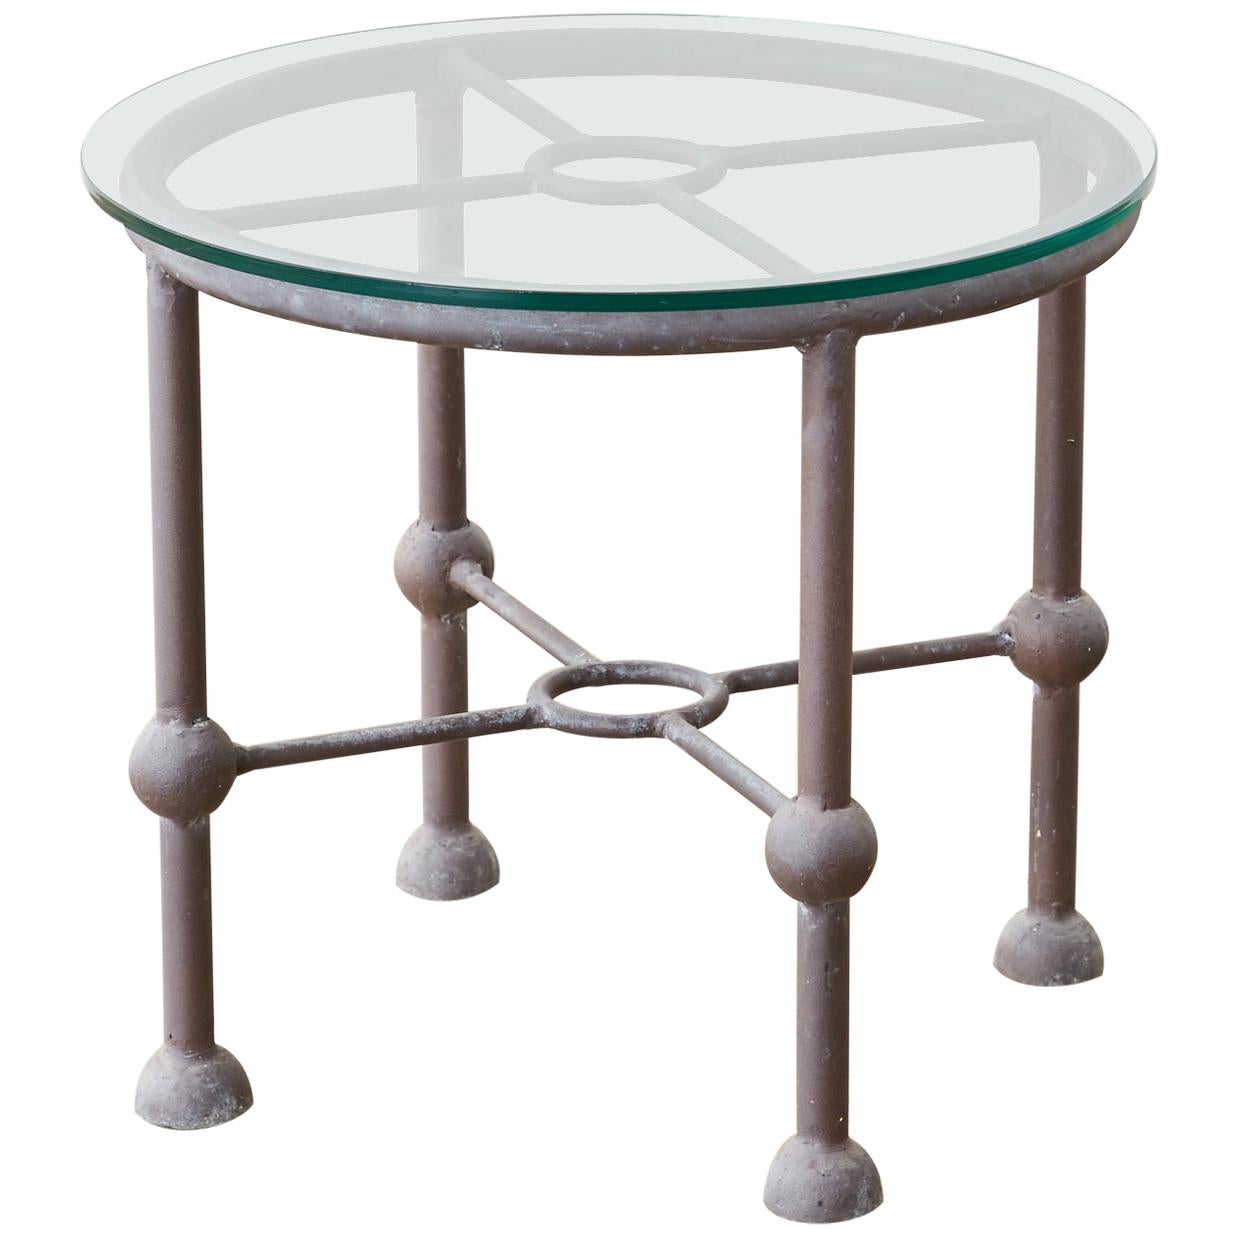 Papperzini Style Patio Garden Drink Table